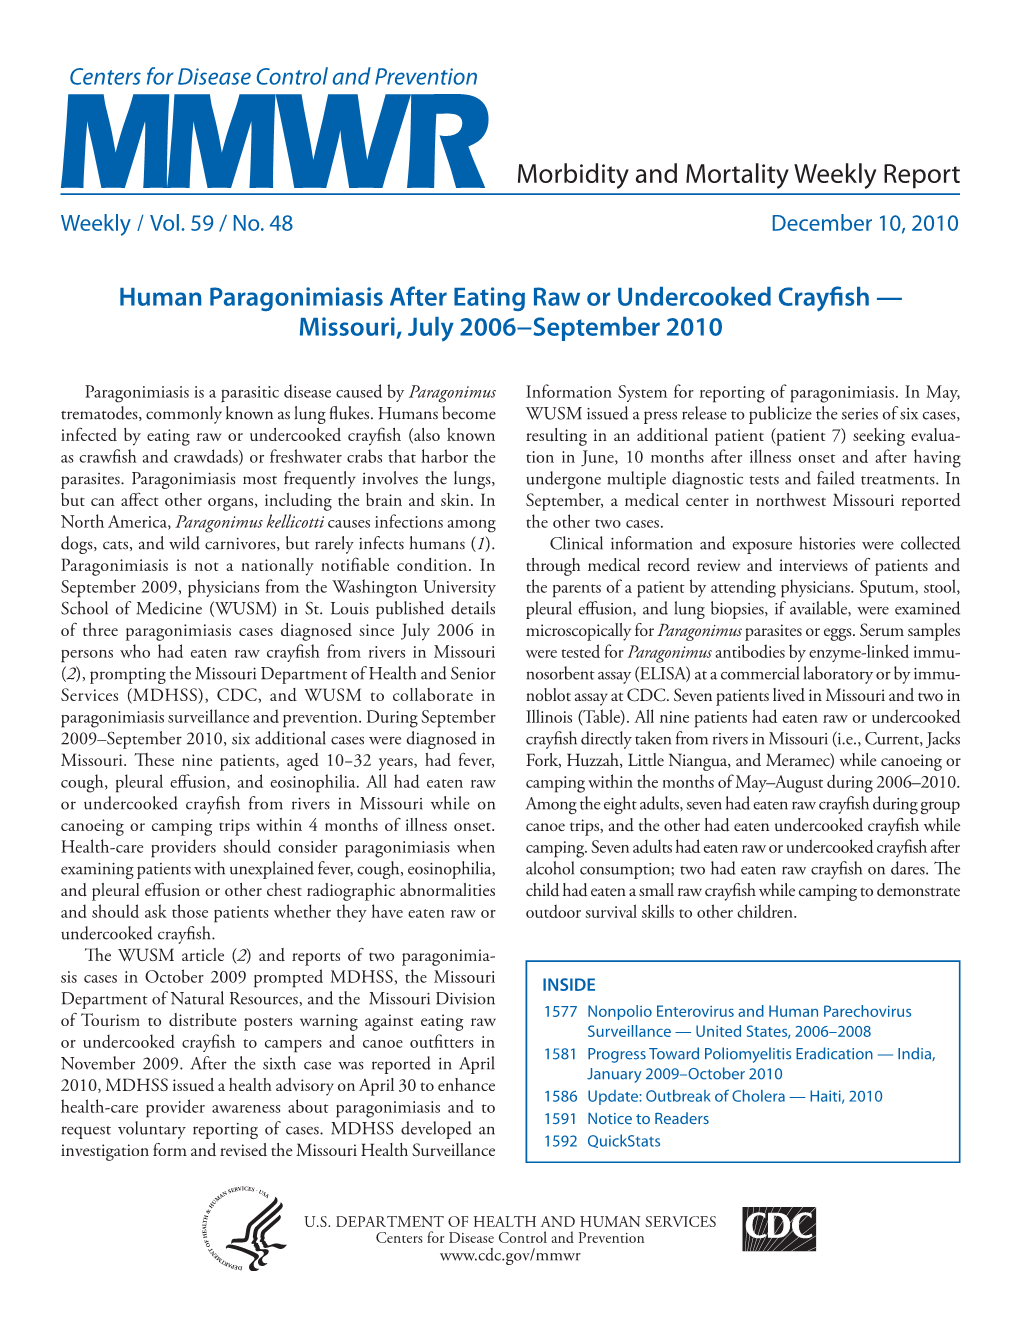 Morbidity and Mortality Weekly Report Human Paragonimiasis After